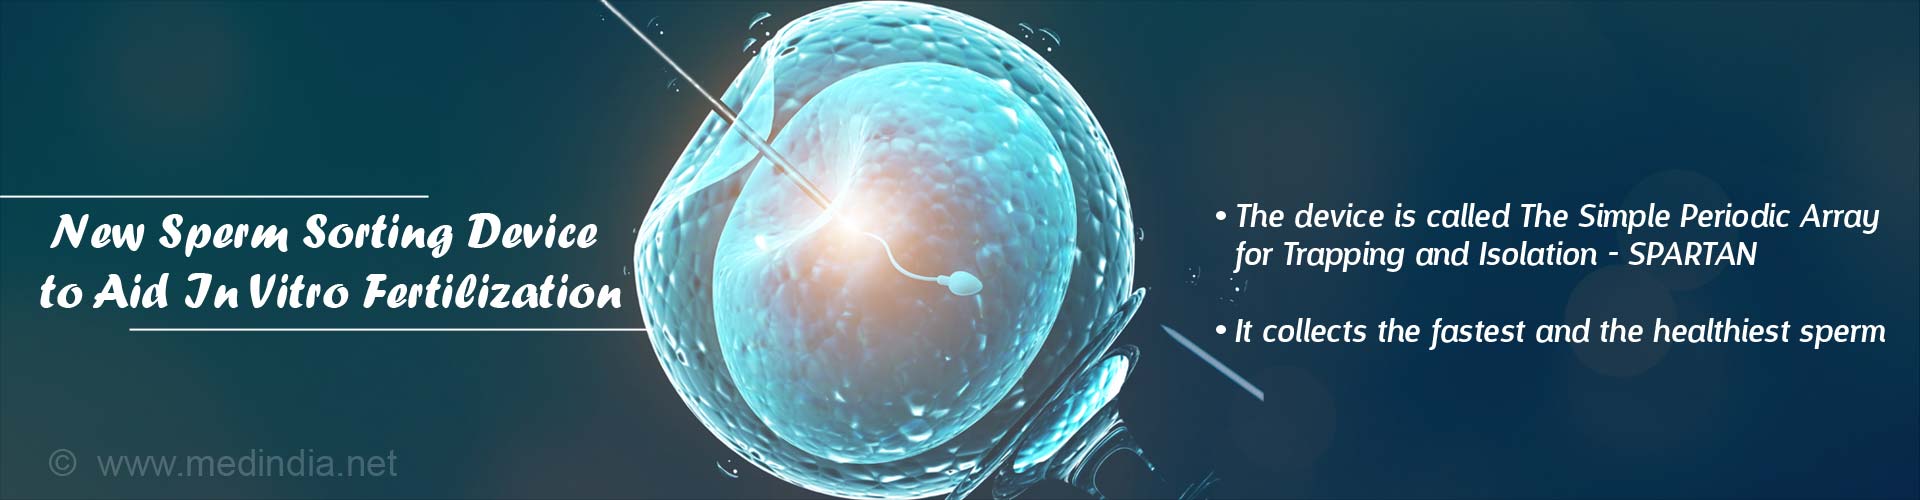 new sperm sorting device to aid in vitro fertilization
- the device is called ''the simple periodic array for trapping and isolation'' - SPARTAN
- it collects the fastest and the healthiest sperm